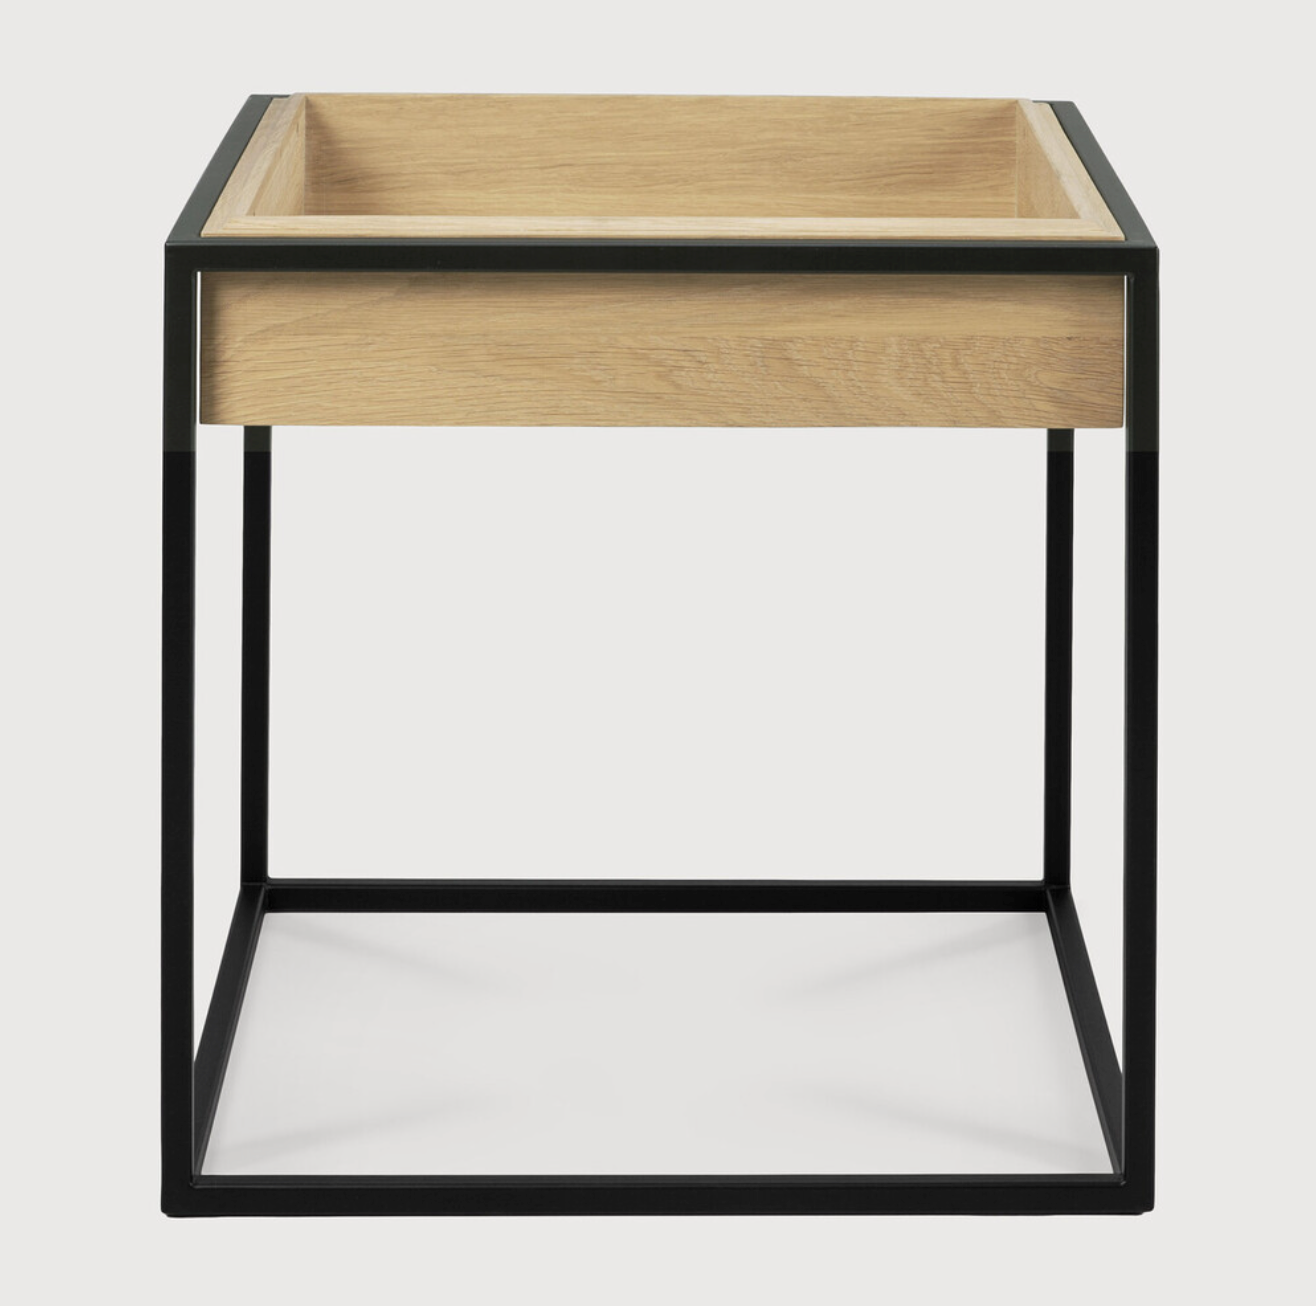 Balance and function come together in the Monolit side table. This simple, sleek table includes storage and we LOVE hidden storage! Dress up your living room or office with a piece that is both functional and stylish!  Dimensions: 19"w x 19"d x 20.5"h  Weight: 22 lbs  Material: Oak, 100% solid wood Finish: Oiled